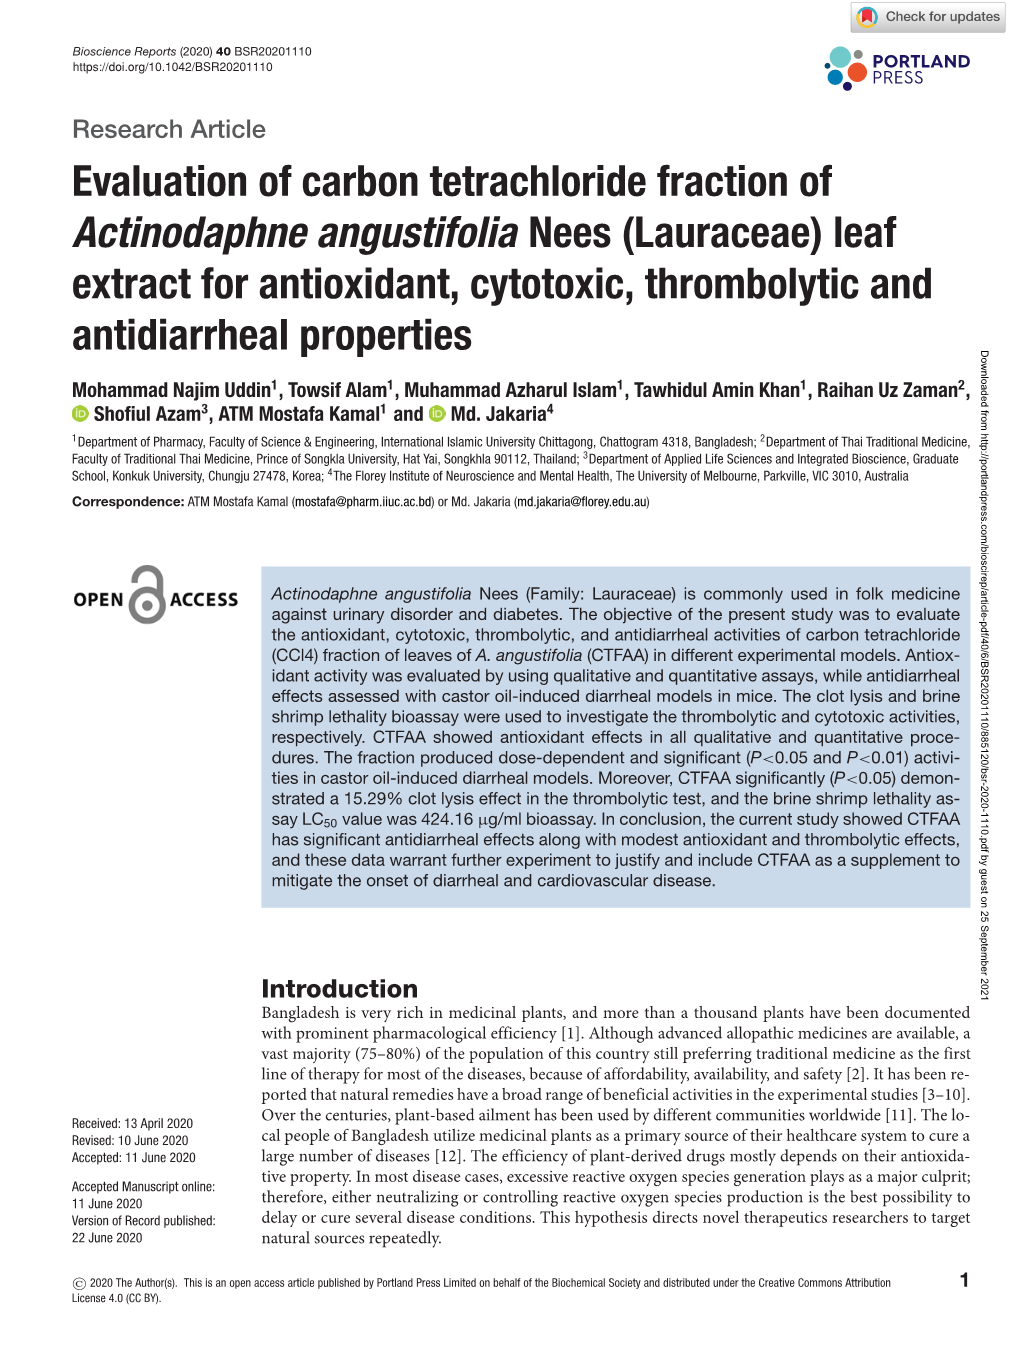 Evaluation of Carbon Tetrachloride Fraction of Actinodaphne Angustifolia Nees (Lauraceae) Leaf Extract for Antioxidant, Cytotoxic, Thrombolytic And